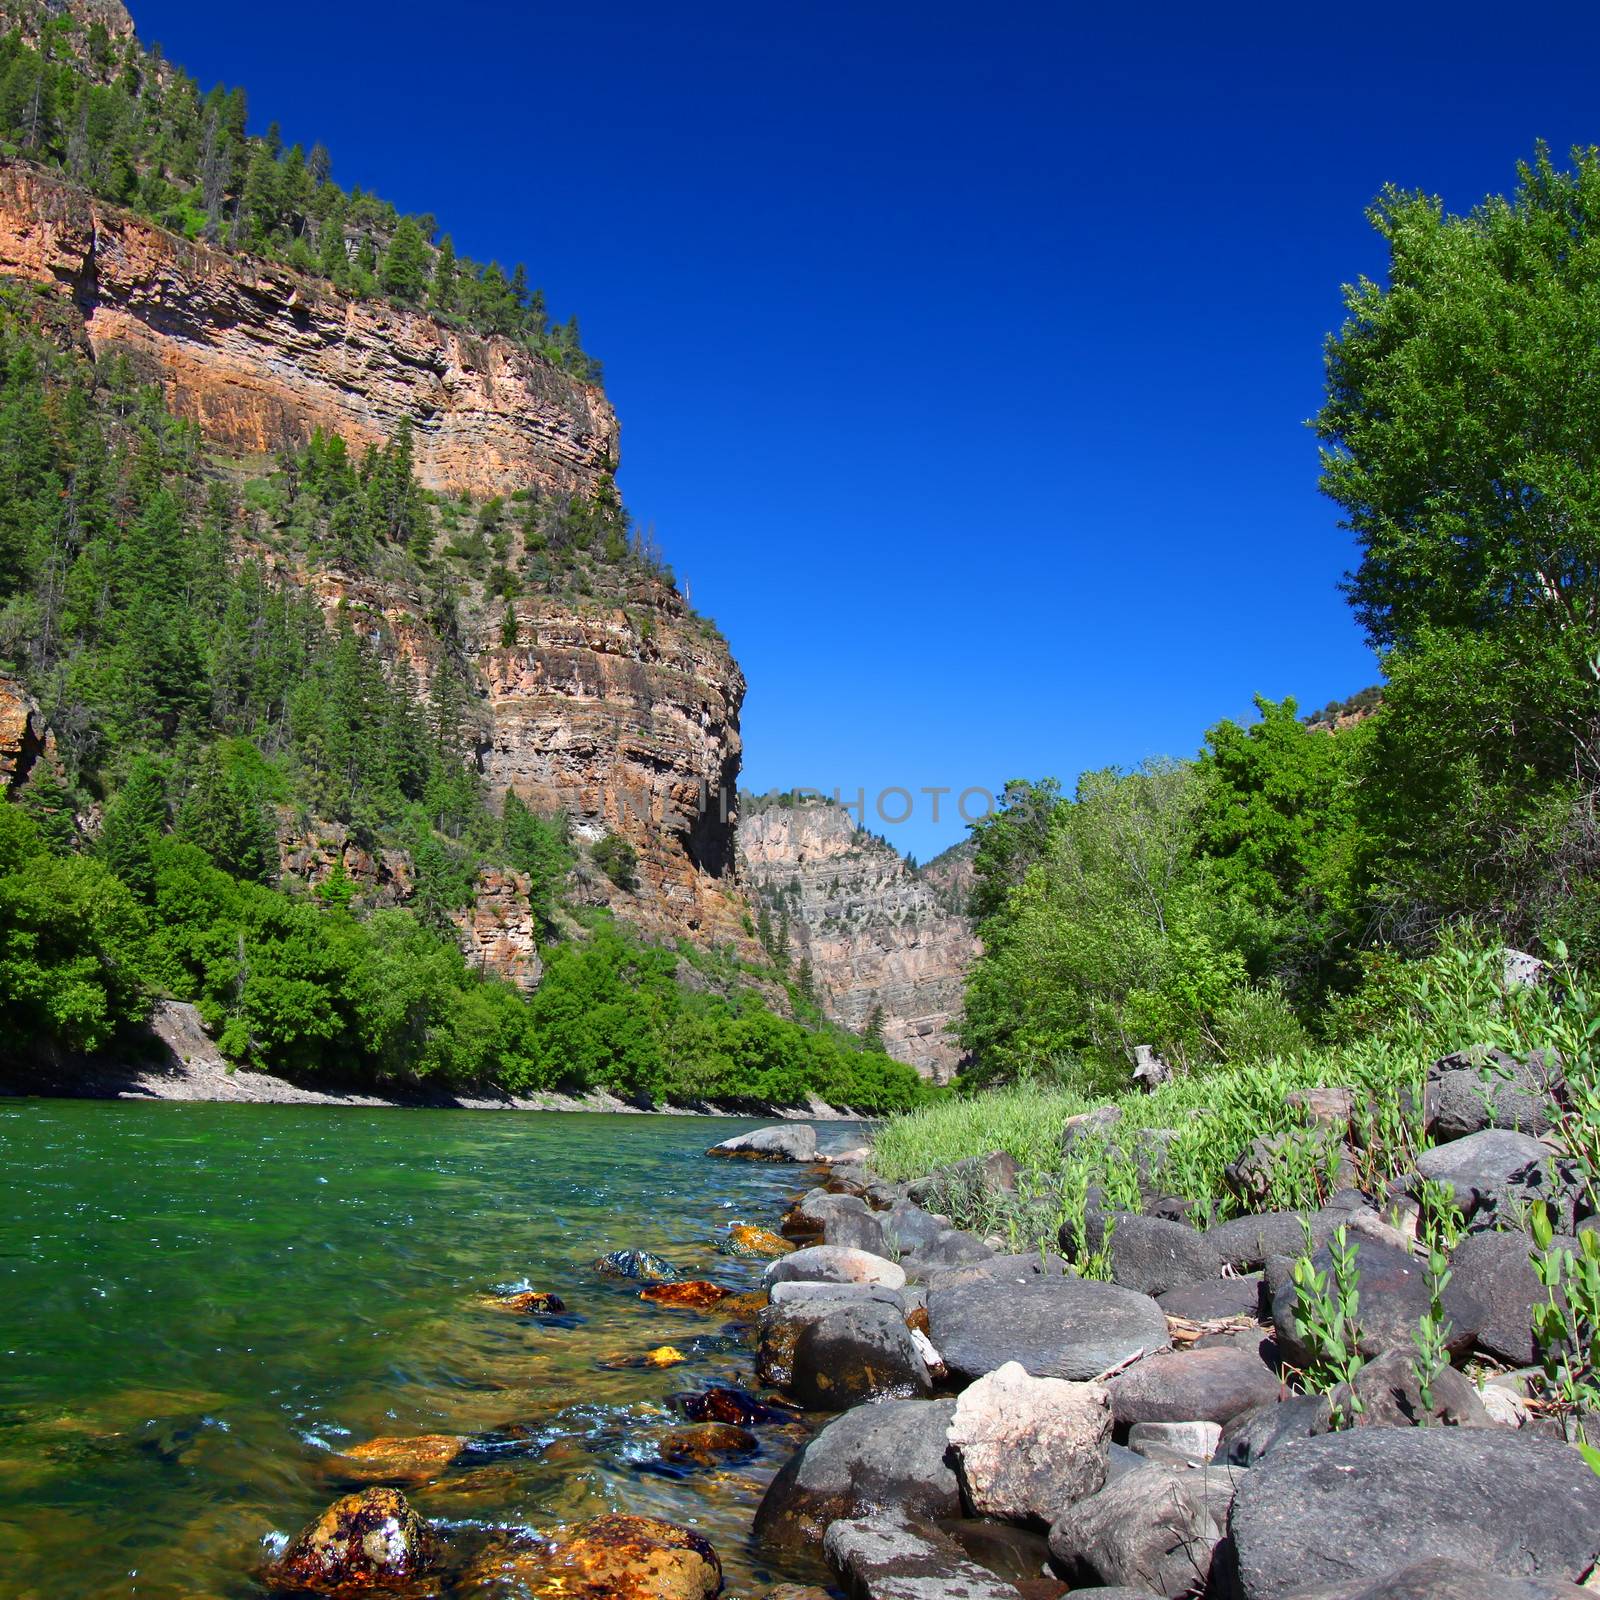 Colorado River in Glenwood Canyon by Wirepec